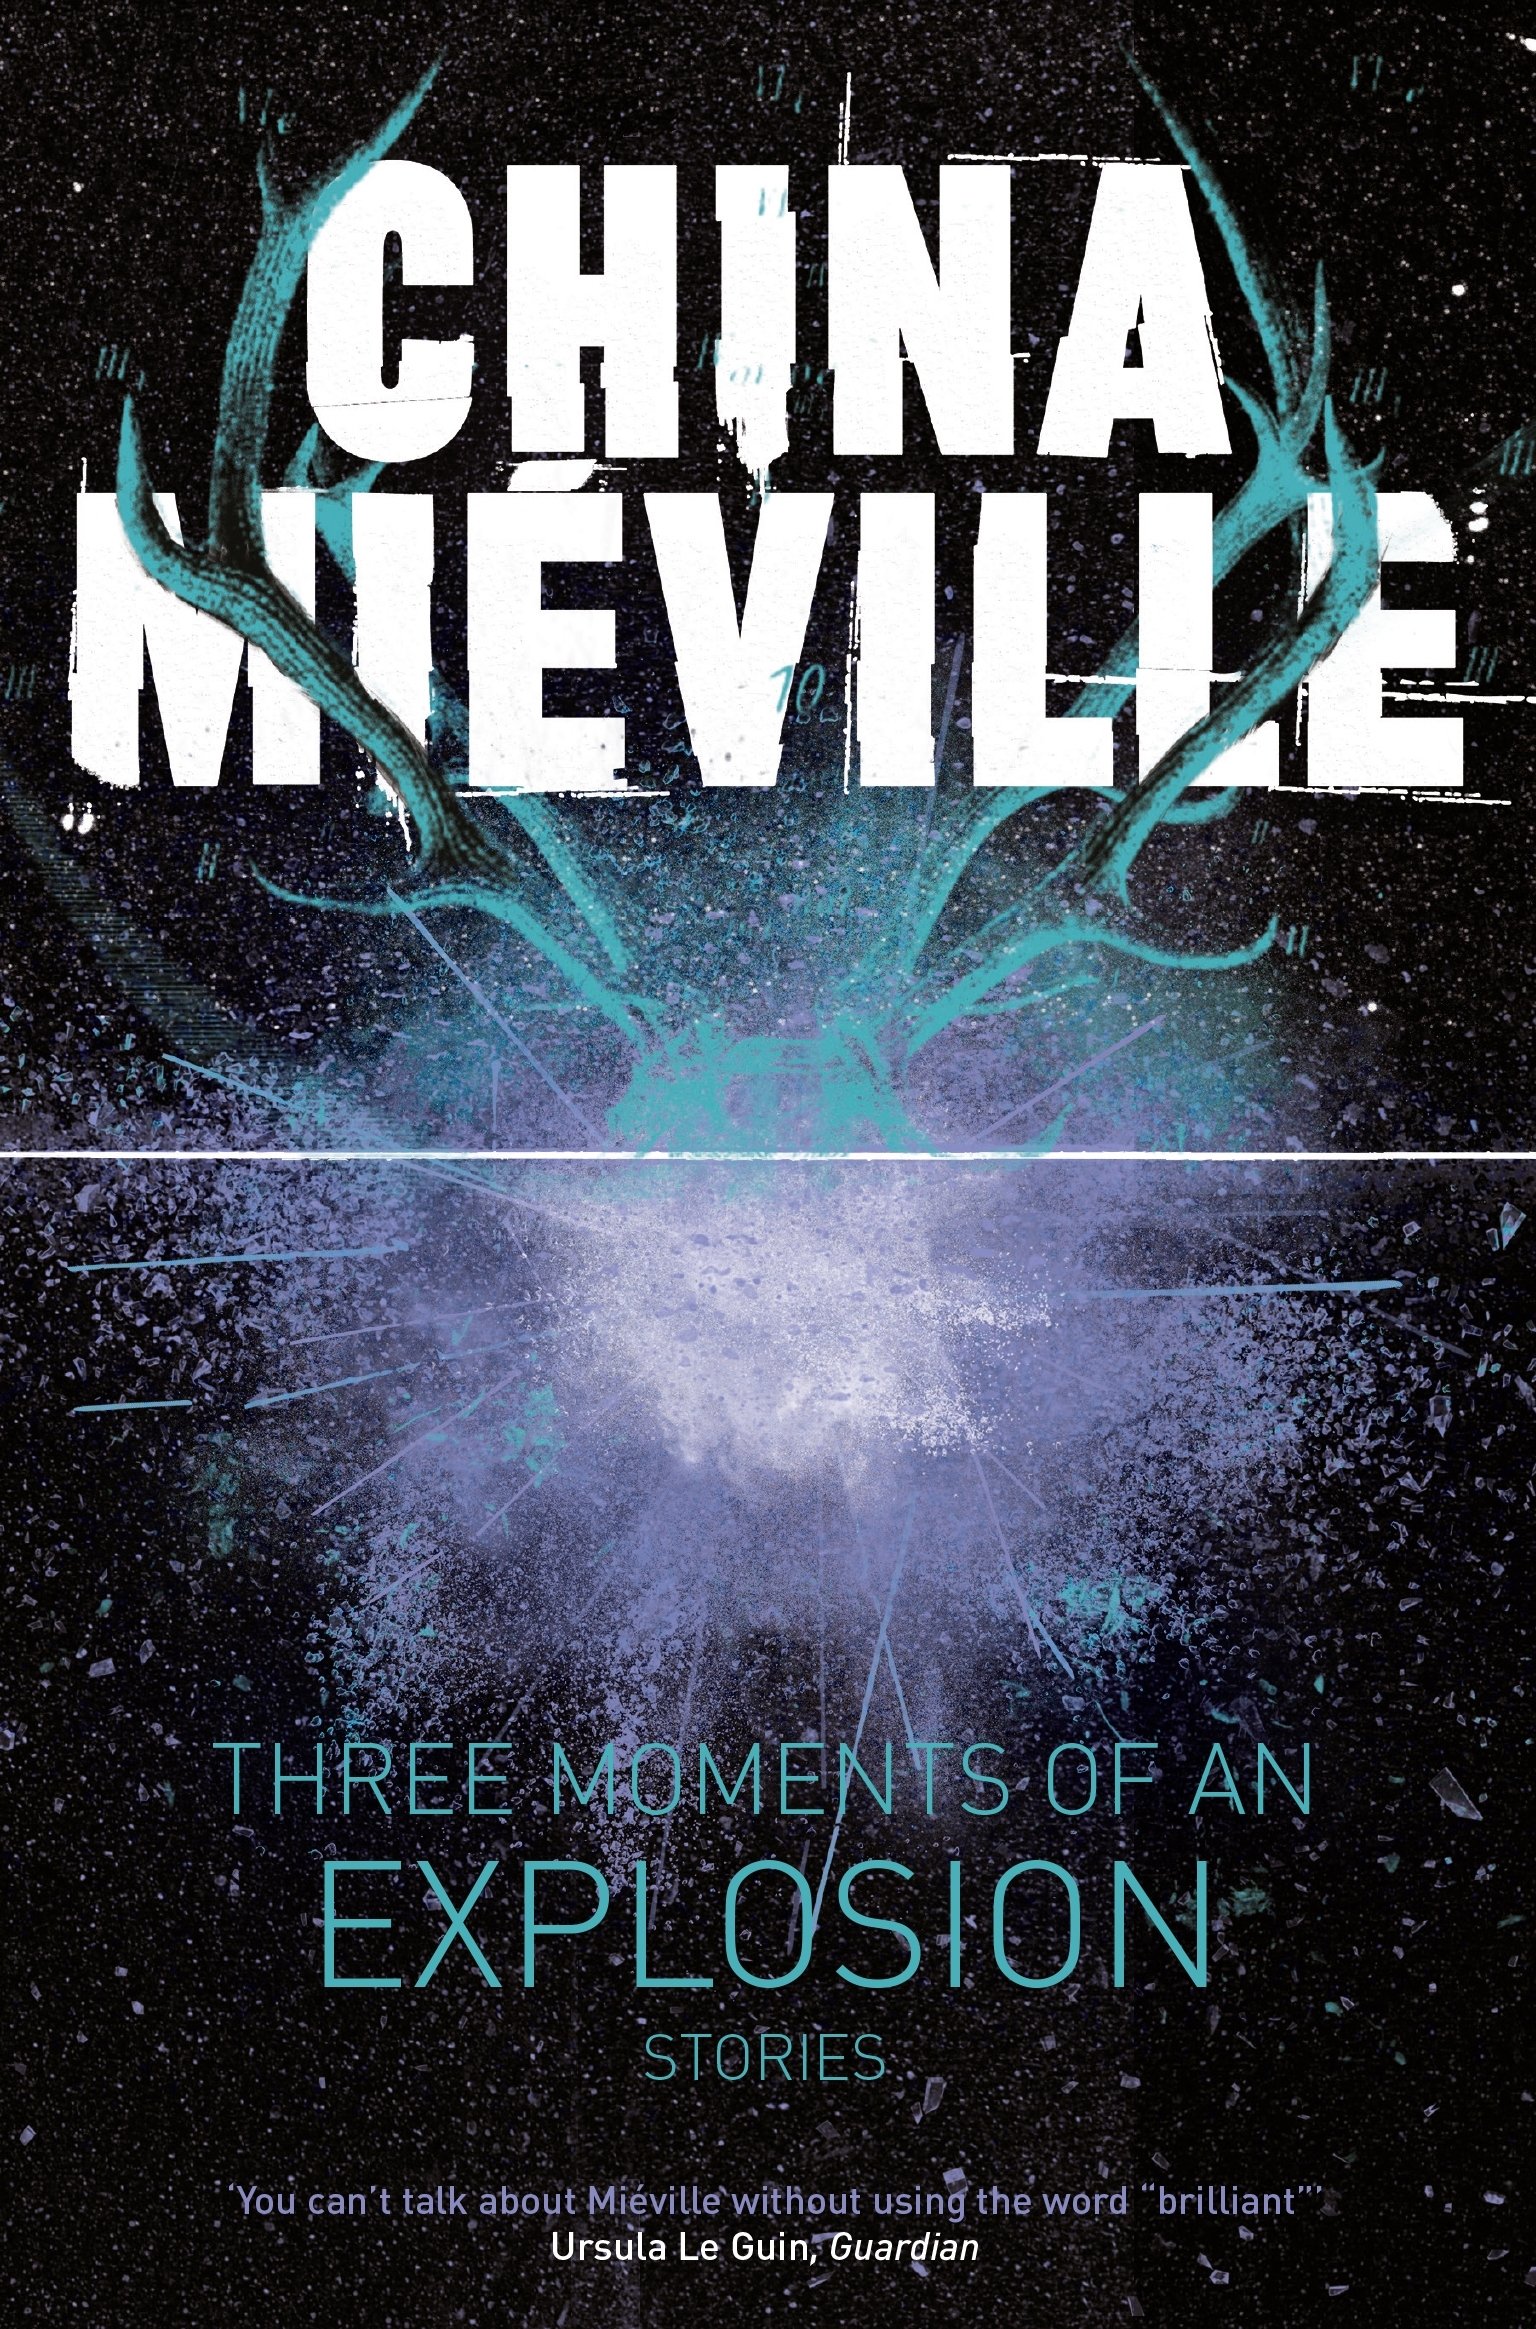 Three Moments of an Explosion: Stories | China Mieville